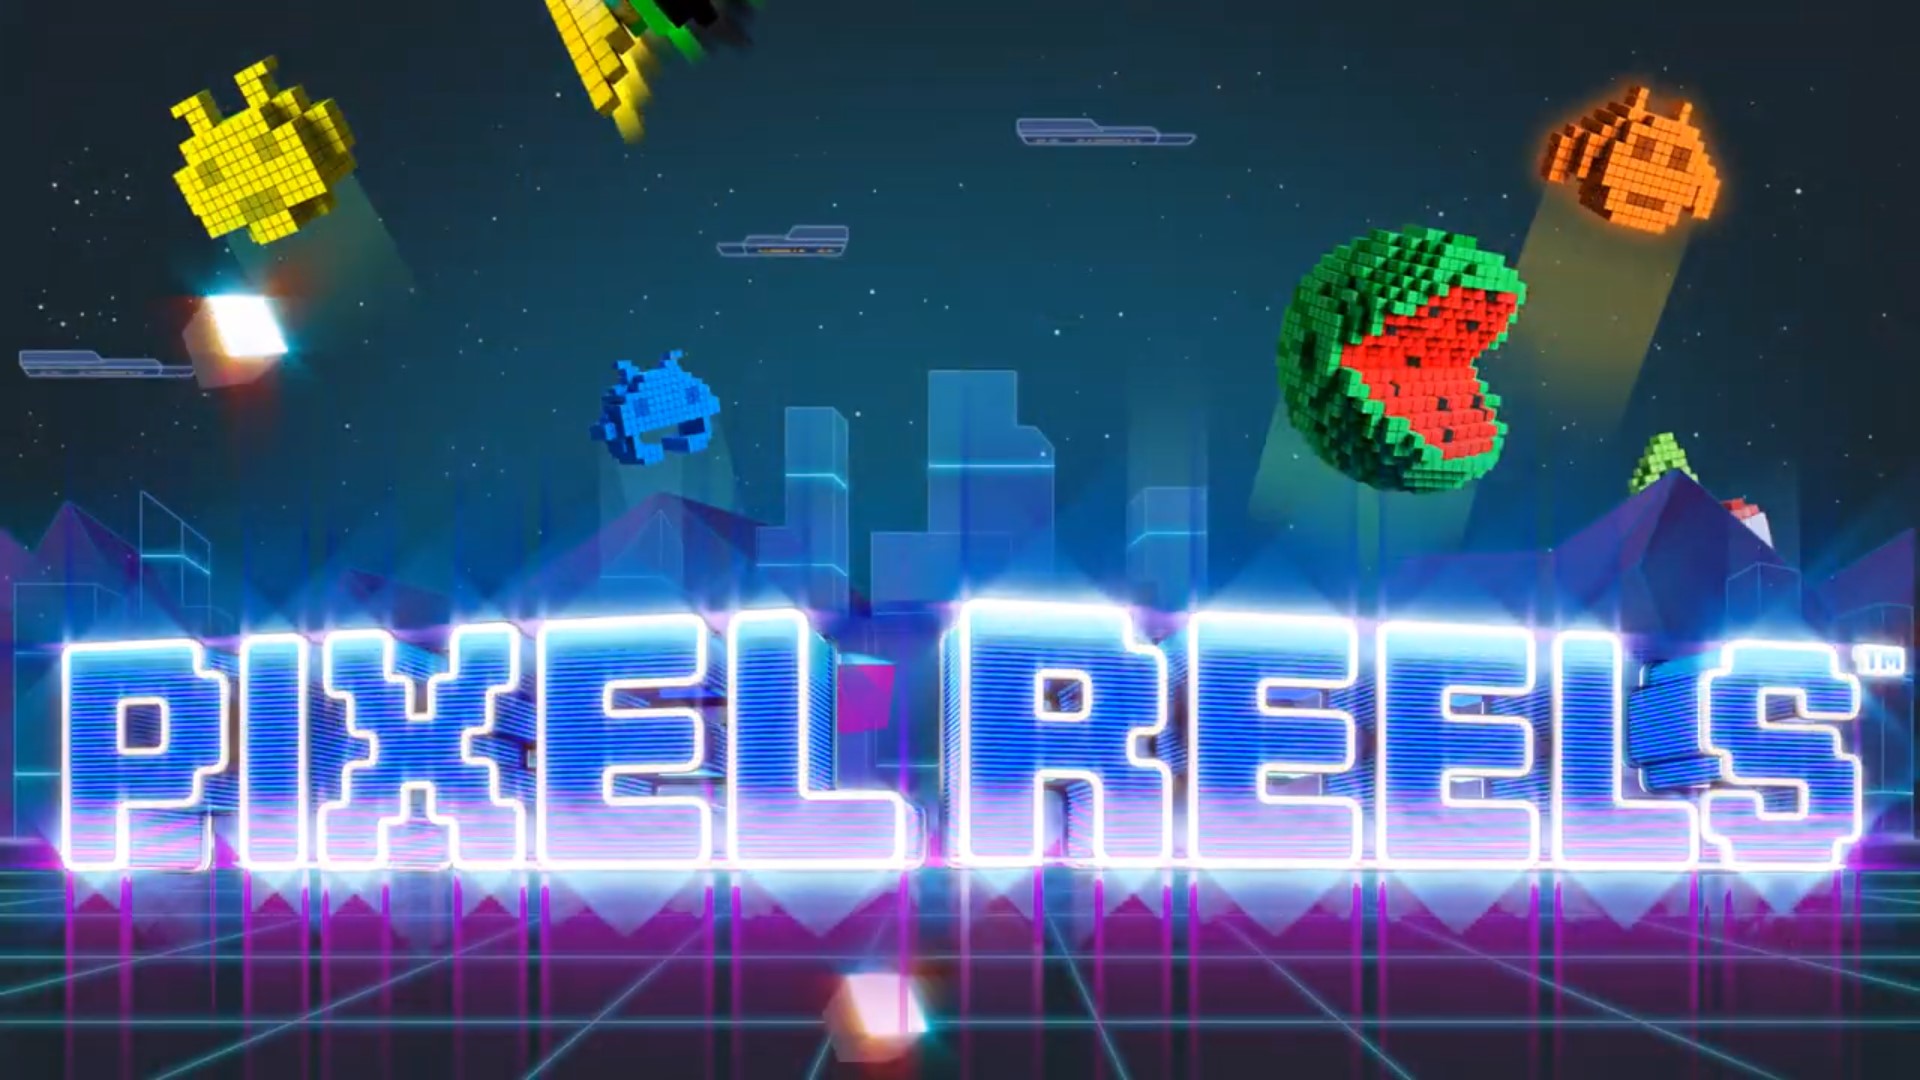 Pixel Reels is a new title from Synot Games which embraces pixels and aliens as part of its portfolio of slots